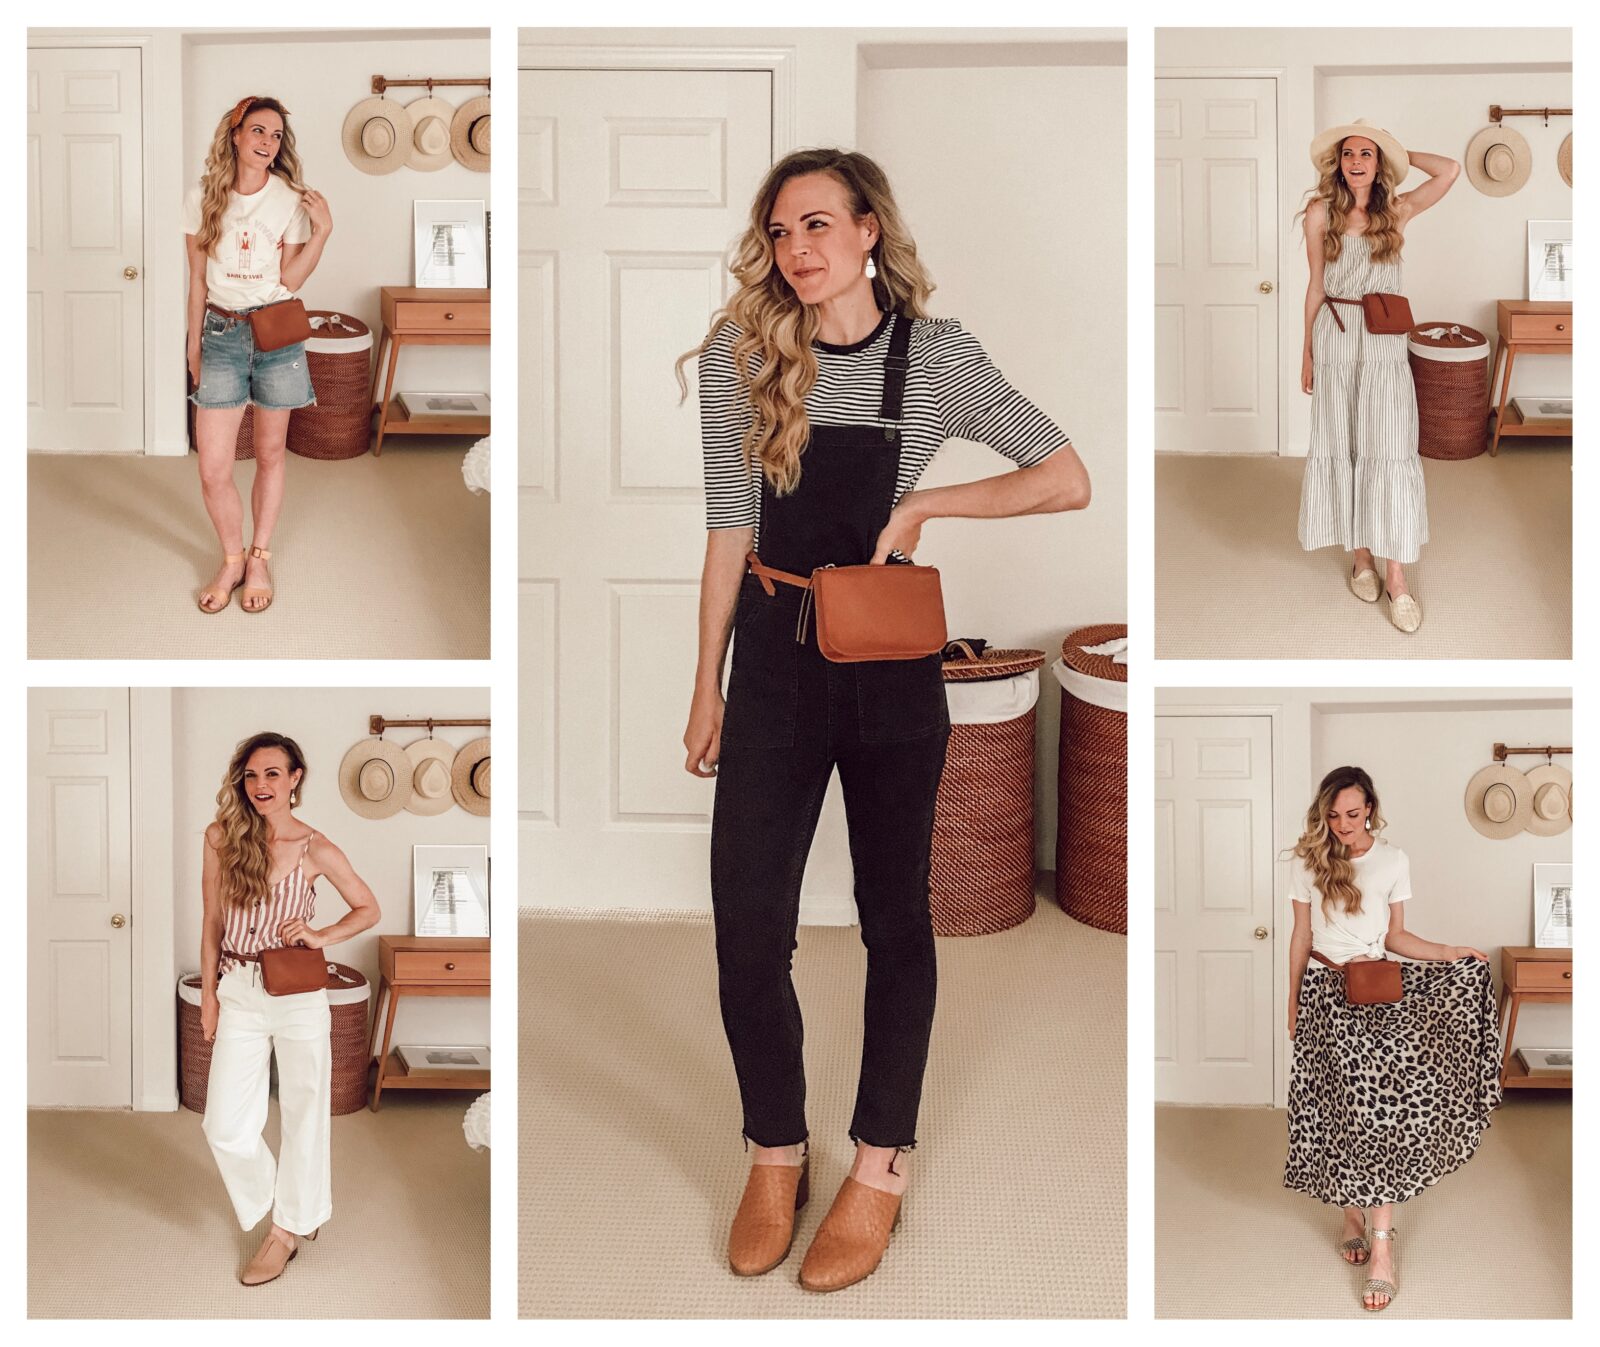 5 Cute And Easy Ways To Style A Belt Bag This Summer